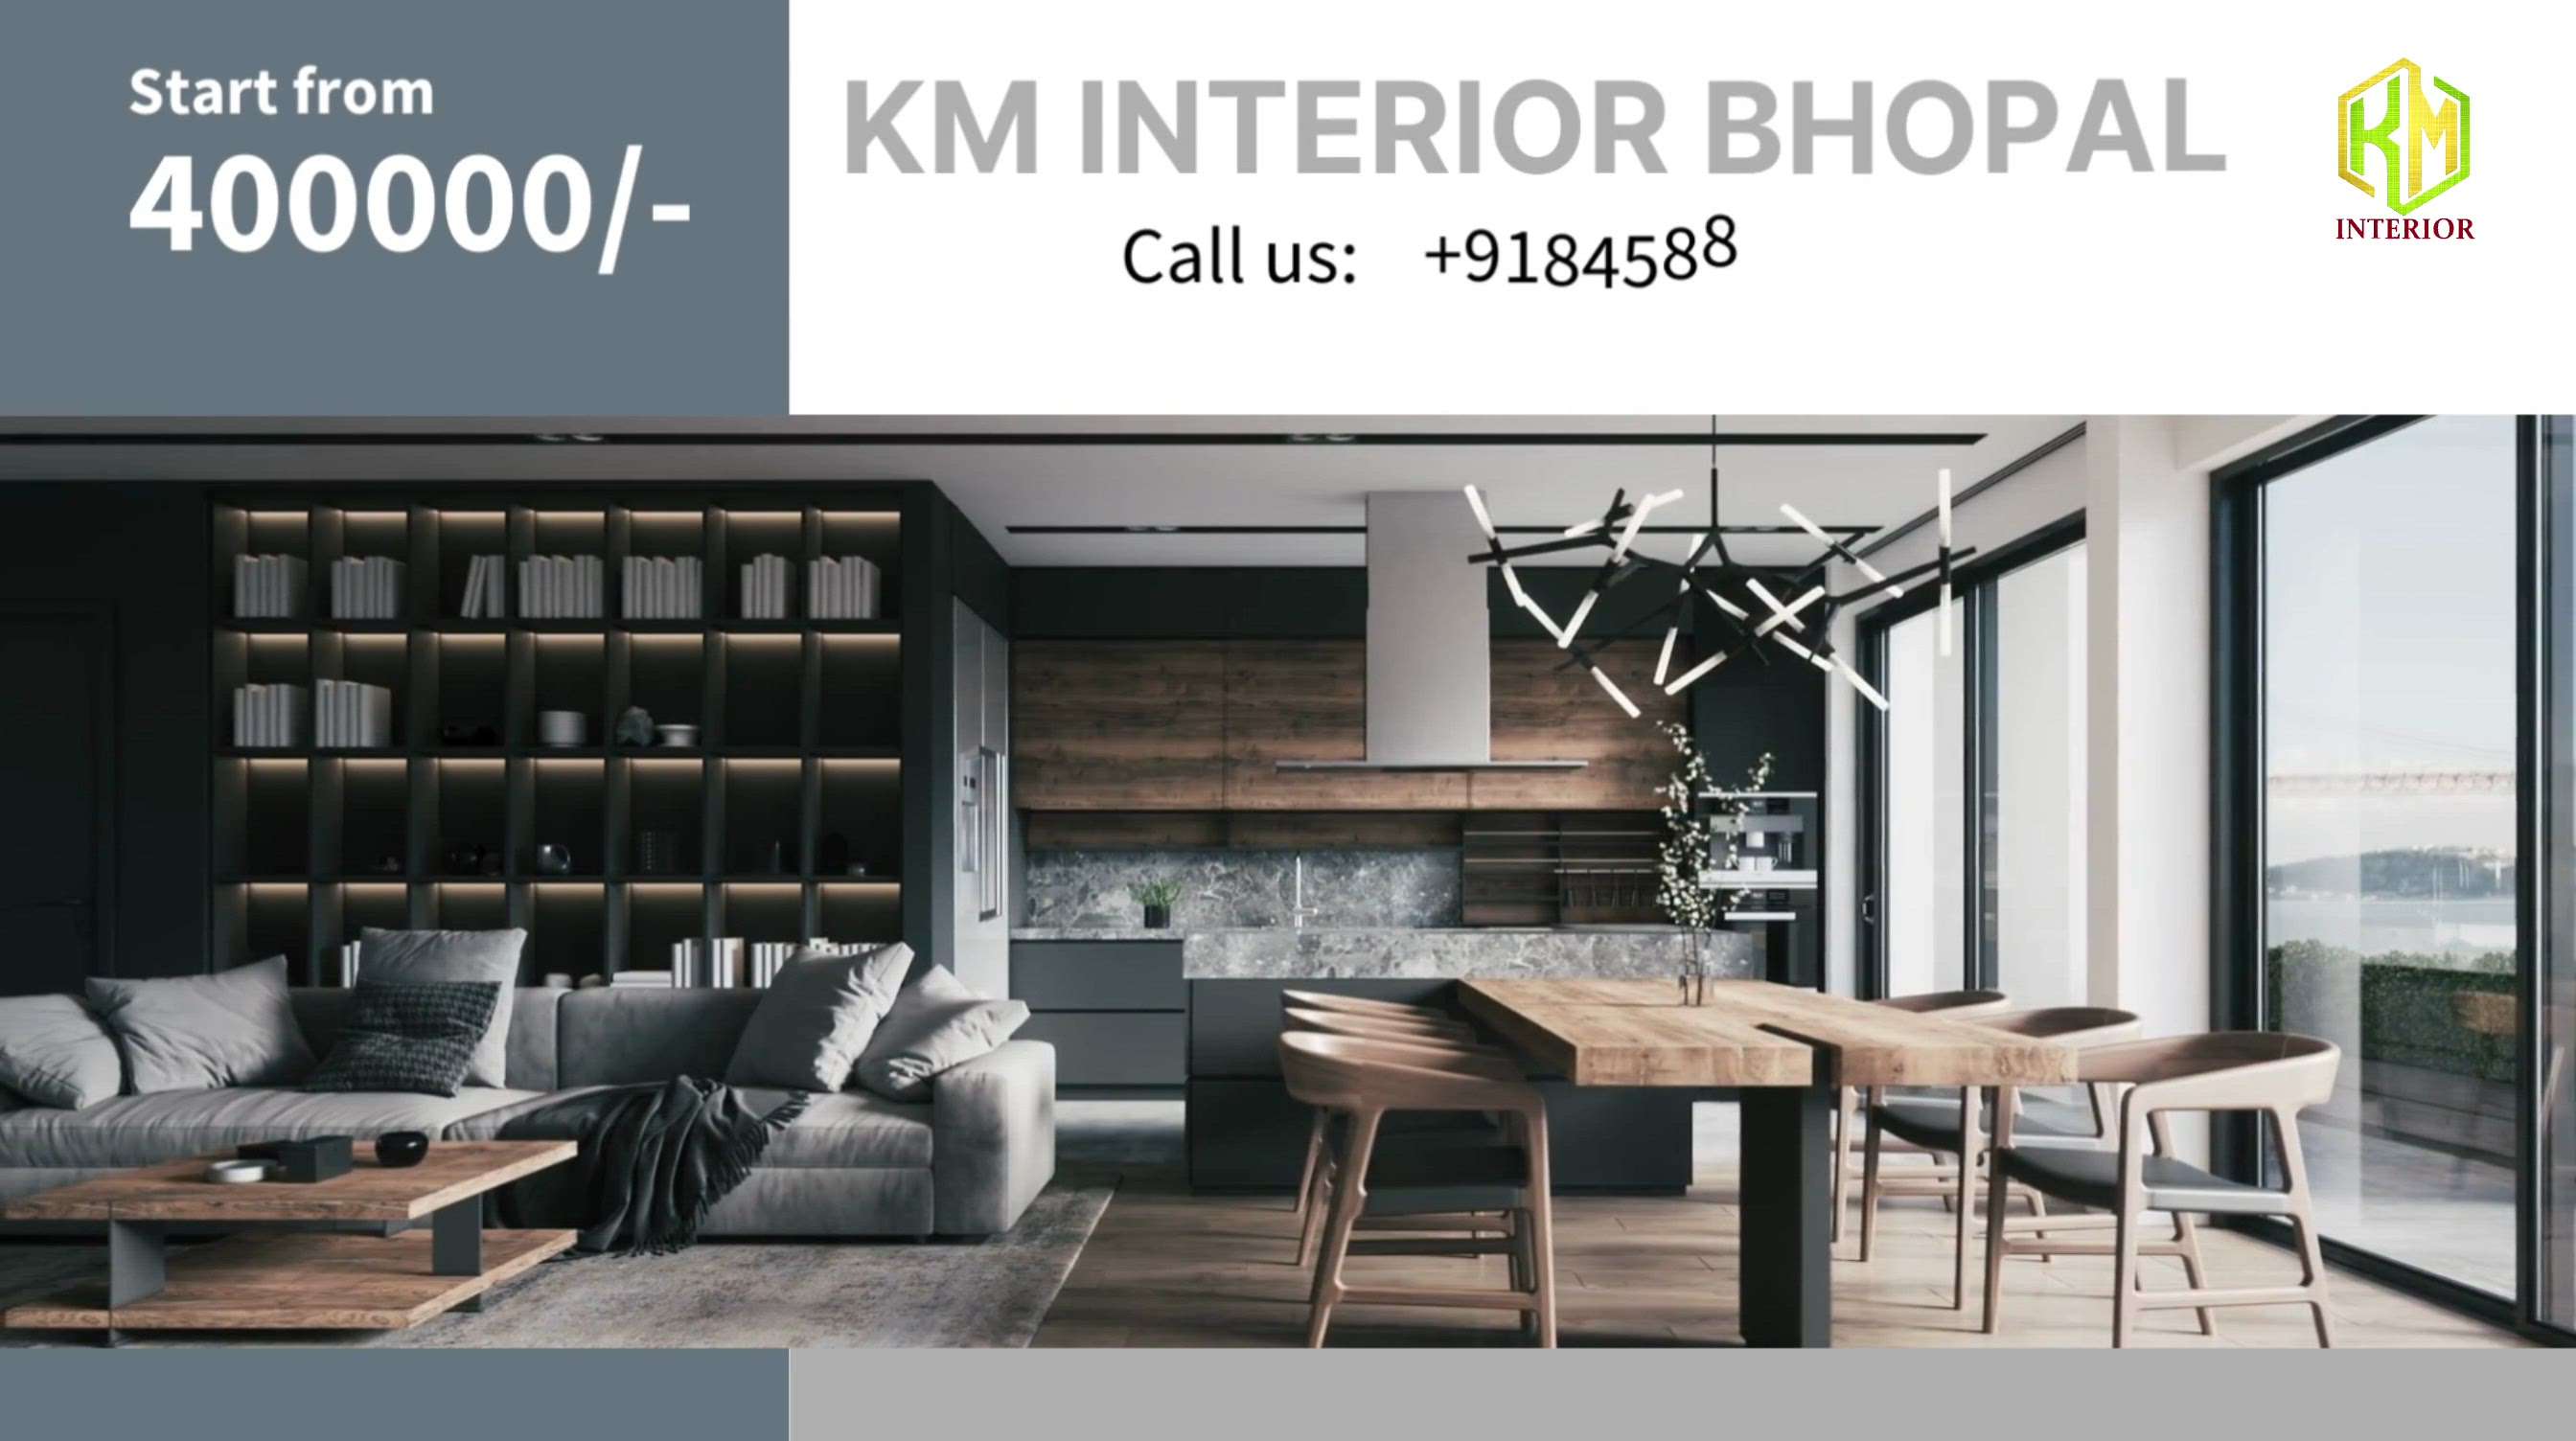 Km interior Bhopal M.P. 43
8458899288 , 9685481987

https://www.facebook.com/profile.php?id=100077541768474&mibextid=ZbWKwL

https://www.facebook.com/kmhome.decor.9?mibextid=ZbWKwL

https://wa.me/c/918458899288

https://youtube.com/@kminterior930

https://koloapp.in/pro/kuldeep-soni

#homedeco #homeinterior #homedecor #homedecoration #homedesign #homeworkout #interiordesign #interiordecor #interior #interiordesigner #modularfurniture #modularkitchen #acrylicmodularkitchen #pvcceiling #pvcwallpanels #lightdecorations #lightdesign #3ddesign #walldecoration #painting #wallart #wallpaper #walltexture #wardrobes #bedroominterior #bed #bathroomdesign #livingroom #bhopal_the_city_of_lakes #bhopal